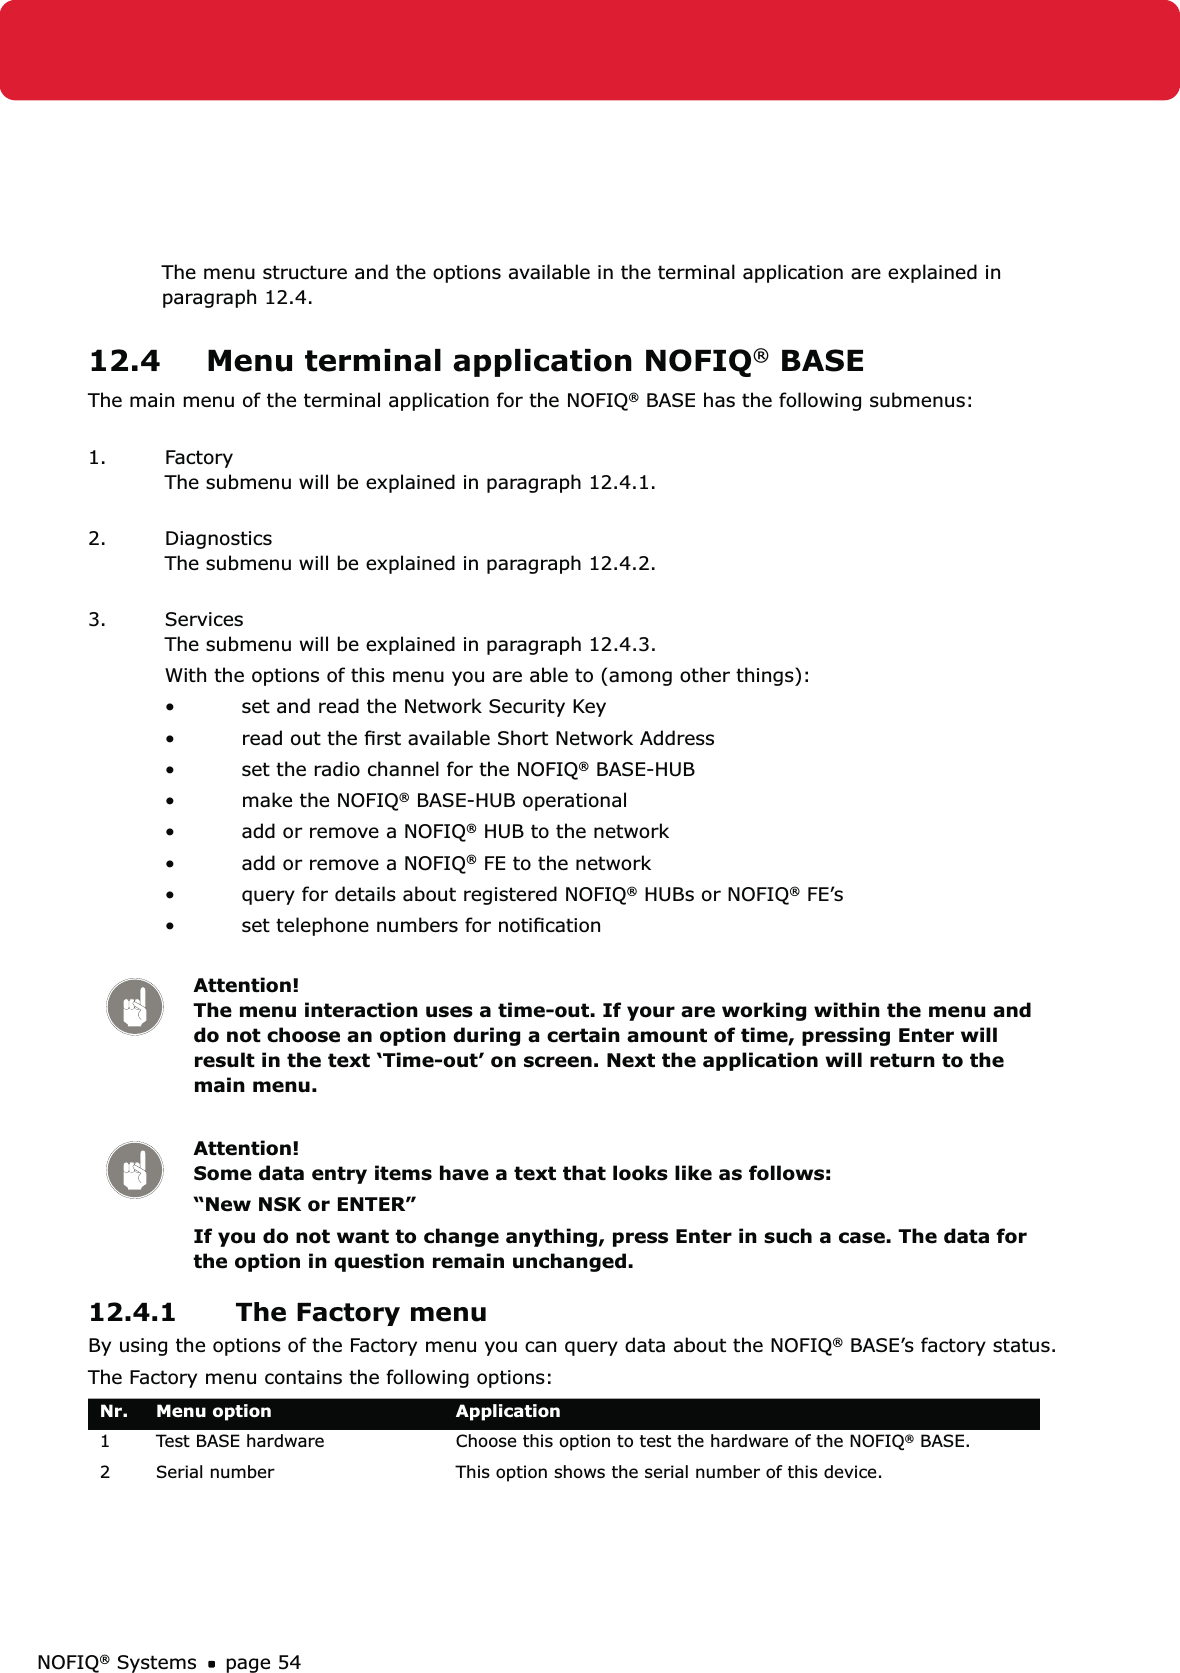 NOFIQ® Systems page 54The menu structure and the options available in the terminal application are explained in paragraph 12.4.12.4  Menu terminal application NOFIQ® BASEThe main menu of the terminal application for the NOFIQ® BASE has the following submenus: 1. Factory The submenu will be explained in paragraph 12.4.1. 2. Diagnostics The submenu will be explained in paragraph 12.4.2. 3. Services The submenu will be explained in paragraph 12.4.3.With the options of this menu you are able to (among other things):set and read the Network Security Key • read out the ﬁrst available Short Network Address • set the radio channel for the NOFIQ•  ® BASE-HUB make the NOFIQ•  ® BASE-HUB operationaladd or remove a NOFIQ•  ® HUB to the networkadd or remove a NOFIQ•  ® FE to the networkquery for details about registered NOFIQ•  ® HUBs or NOFIQ® FE’s set telephone numbers for notiﬁcation • Attention! The menu interaction uses a time-out. If your are working within the menu and do not choose an option during a certain amount of time, pressing Enter will result in the text ‘Time-out’ on screen. Next the application will return to the main menu.Attention! Some data entry items have a text that looks like as follows:“New NSK or ENTER”If you do not want to change anything, press Enter in such a case. The data for the option in question remain unchanged. 12.4.1  The Factory menuBy using the options of the Factory menu you can query data about the NOFIQ® BASE’s factory status.The Factory menu contains the following options:Nr. Menu option Application1 Test BASE hardware Choose this option to test the hardware of the NOFIQ® BASE. 2 Serial number This option shows the serial number of this device.